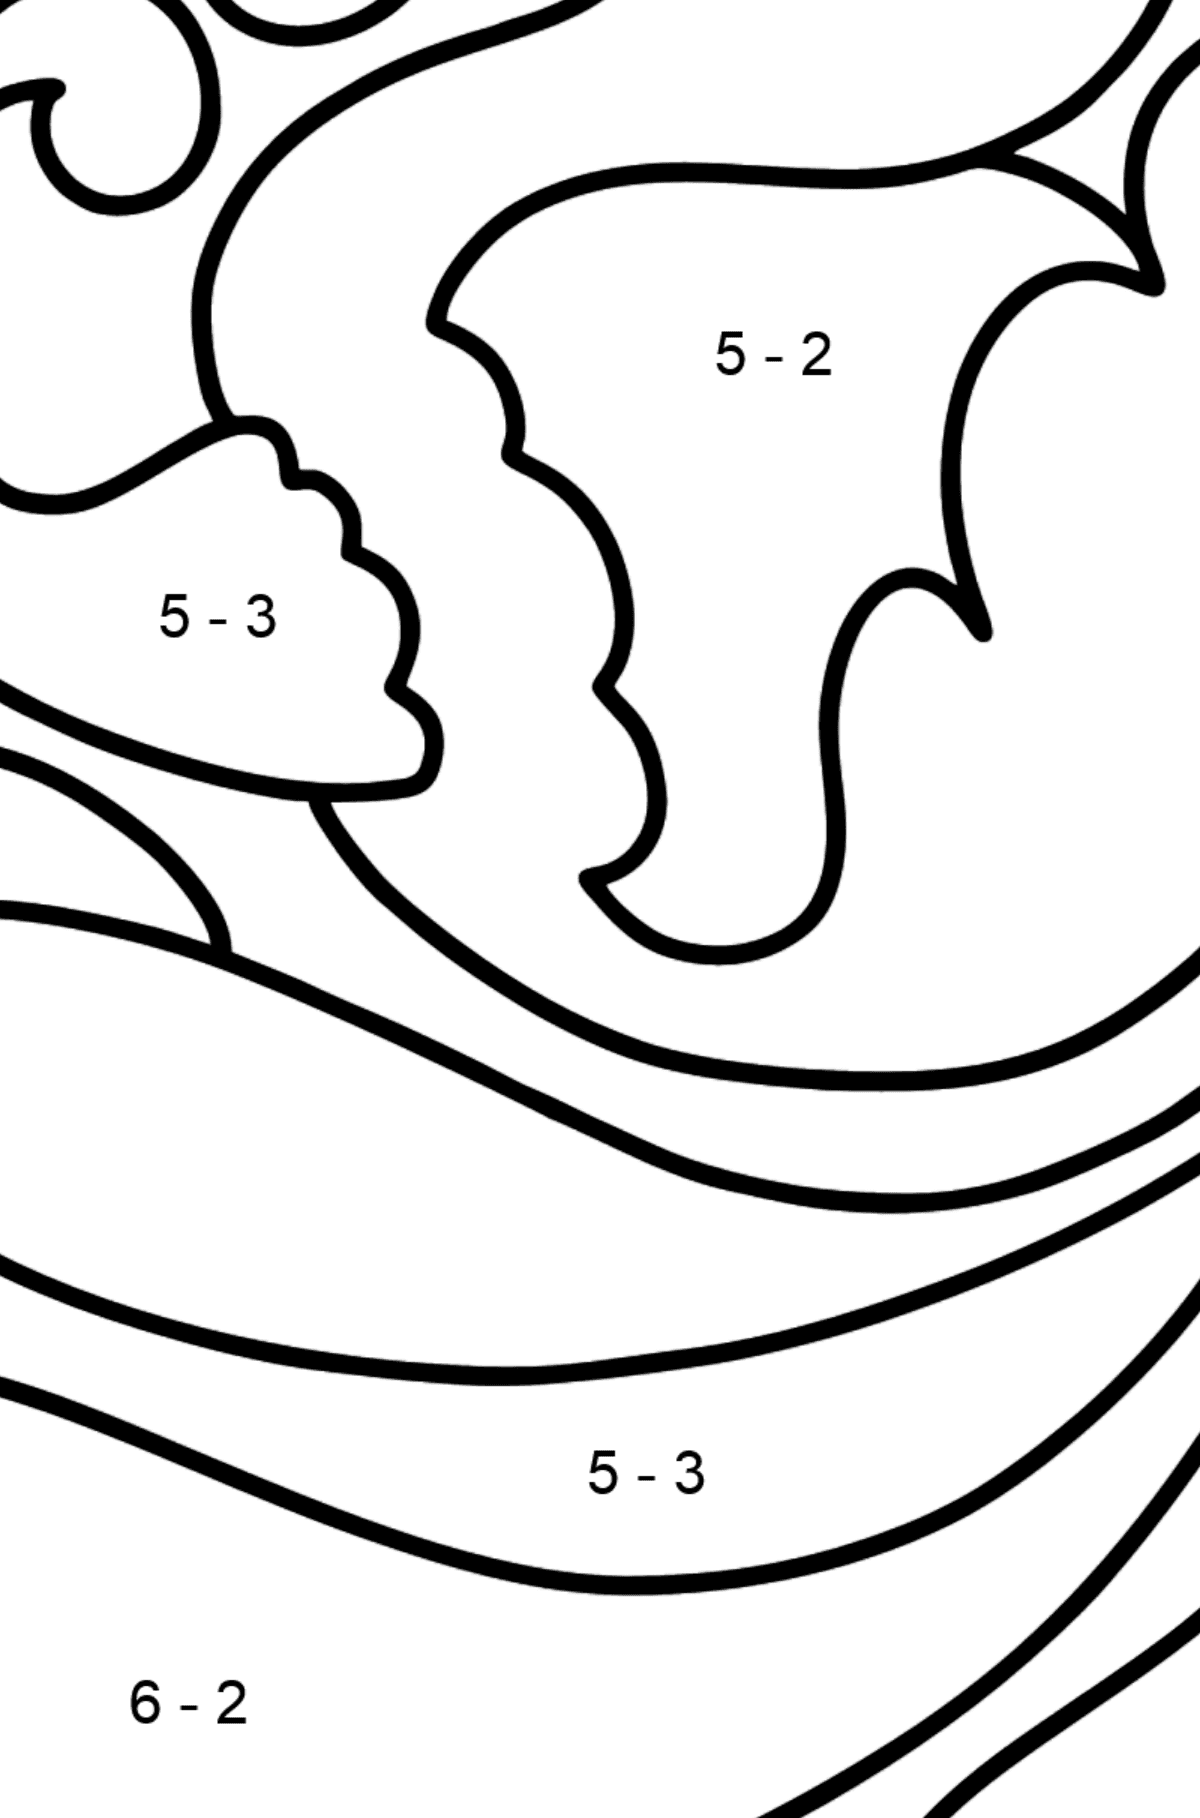 Firebird coloring page - Math Coloring - Subtraction for Kids